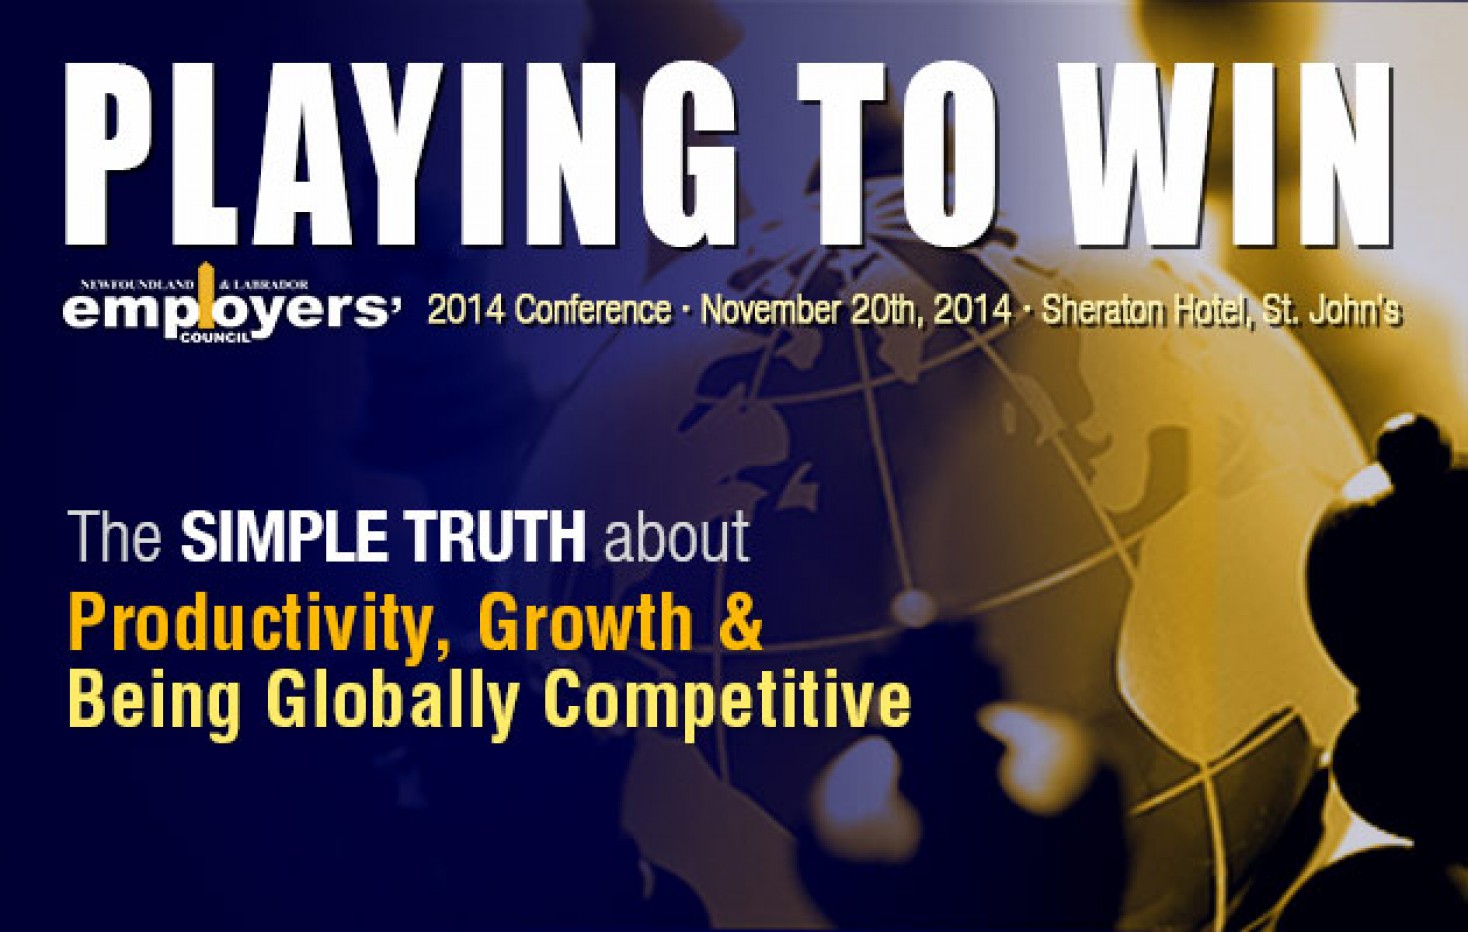 2014 NLEC Conference PLAYING TO WIN a resounding success